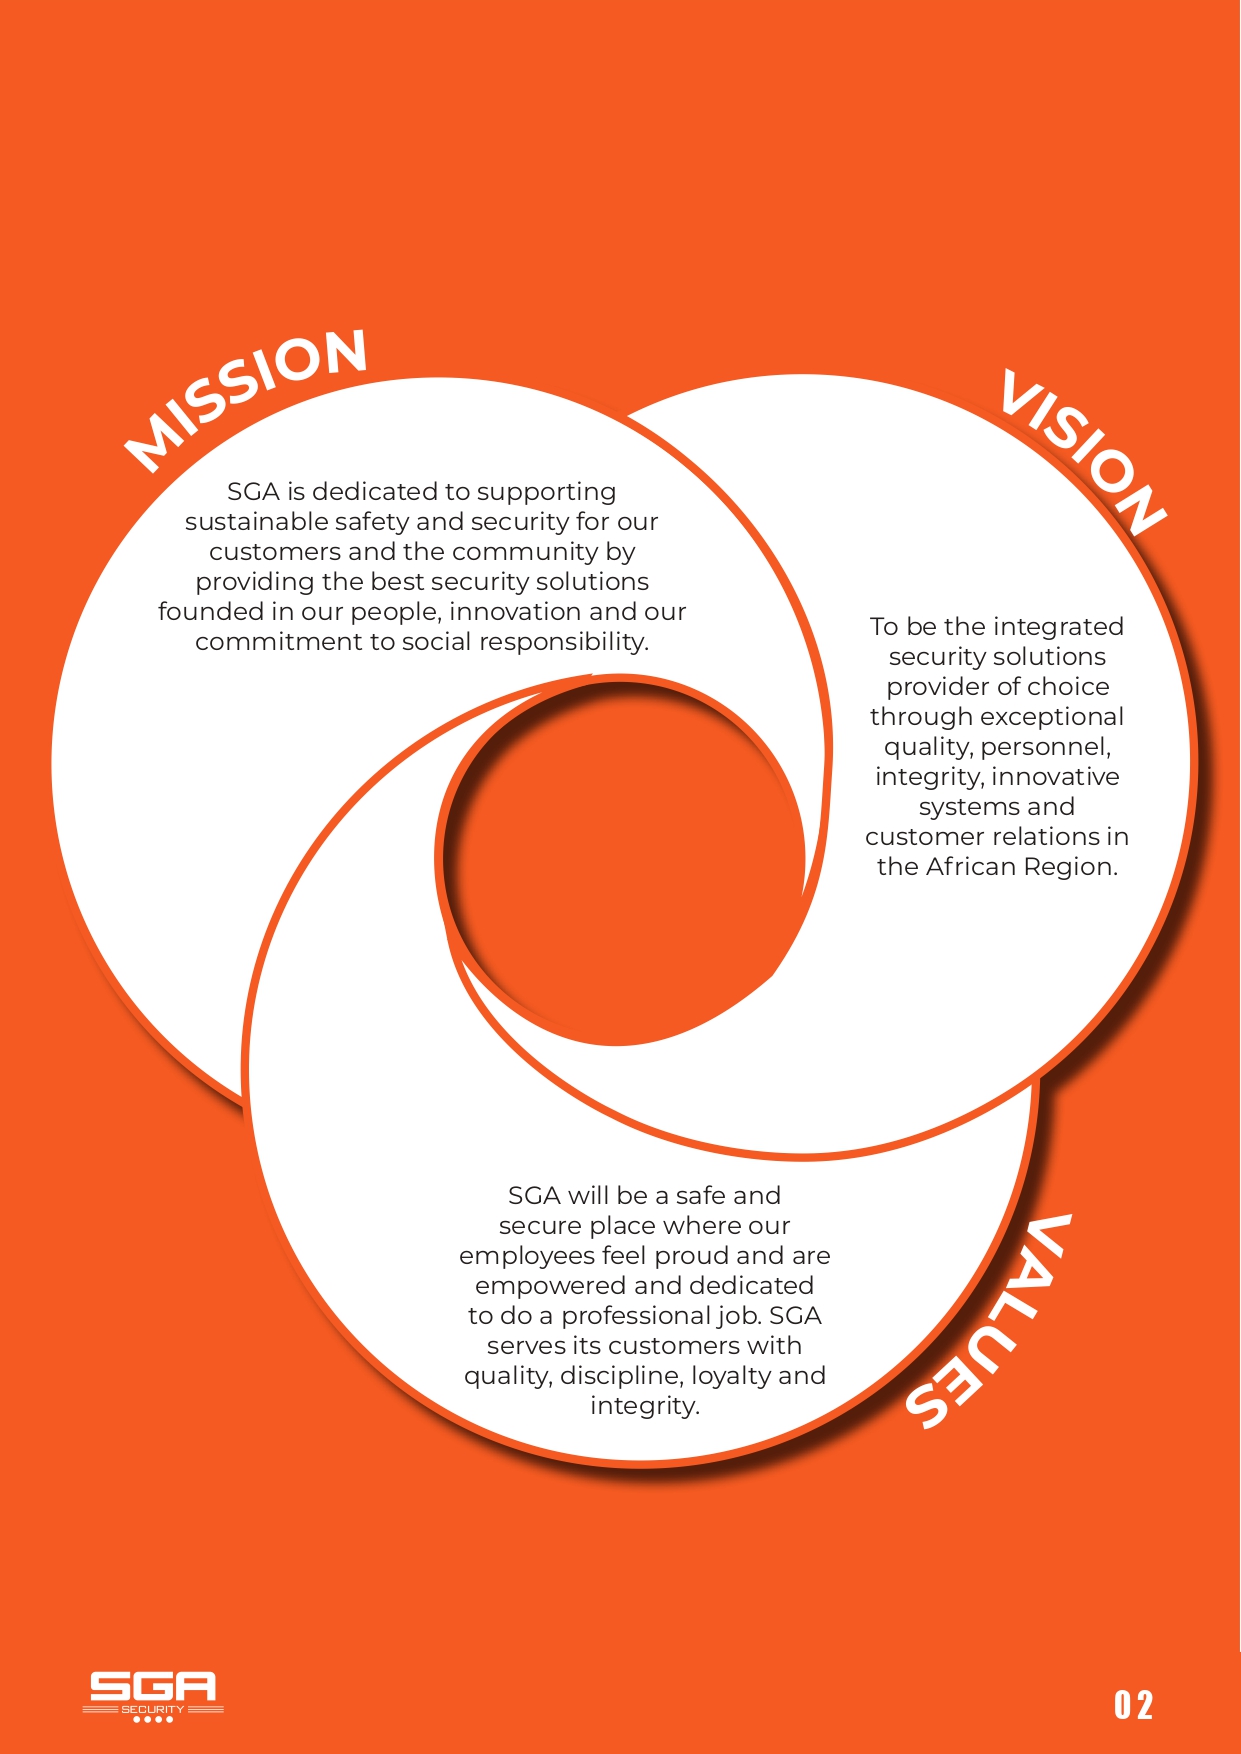 Mission and vision statements